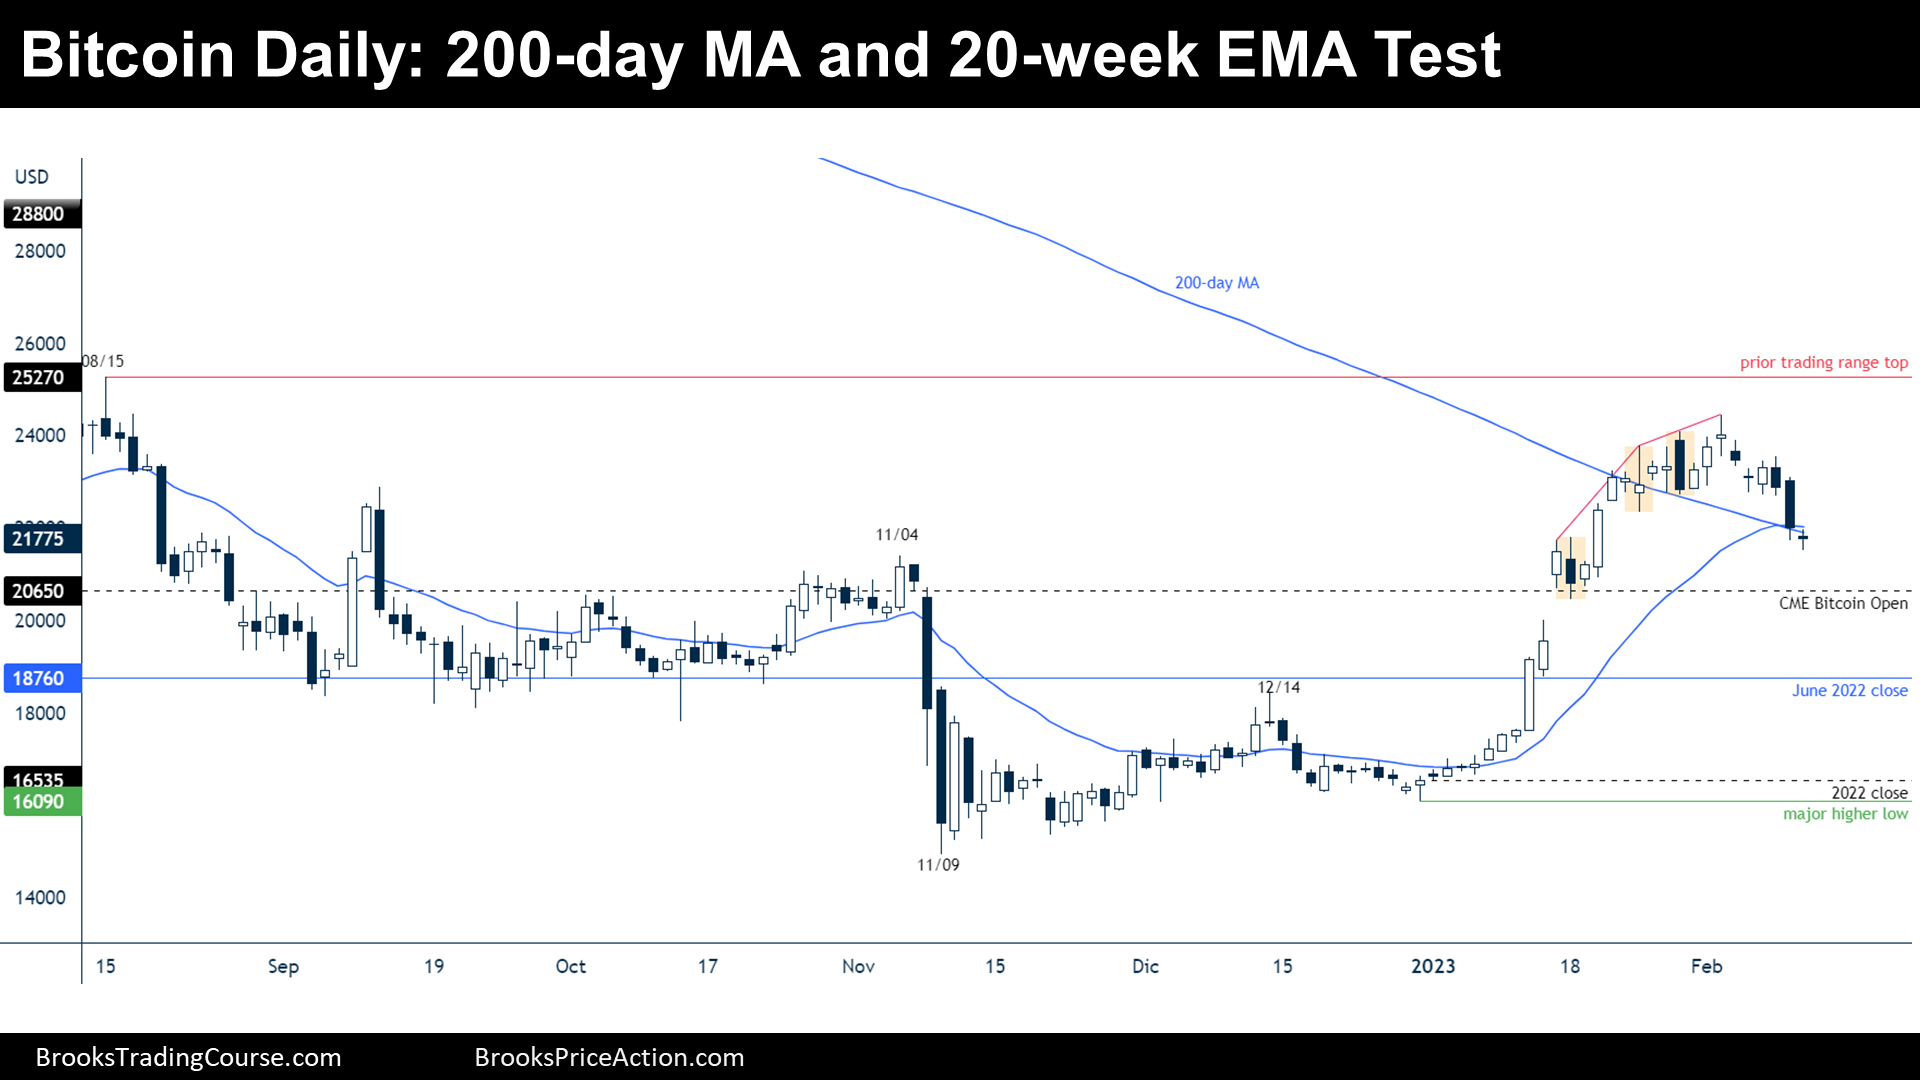 Bitcoin daily chart 200-day MA and 20-week EMA Test